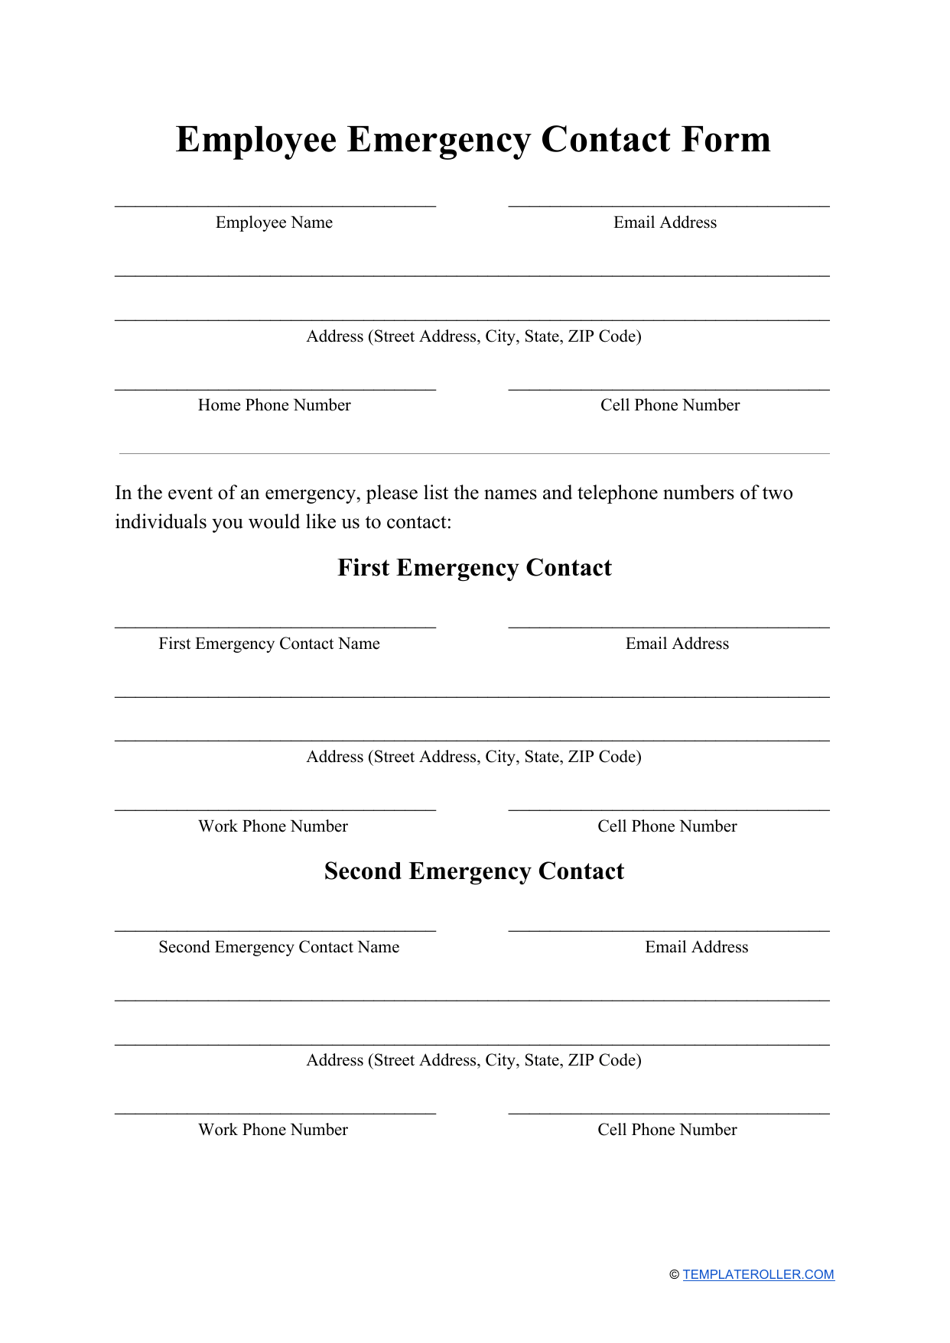 Employee Emergency Contact Form, Page 1